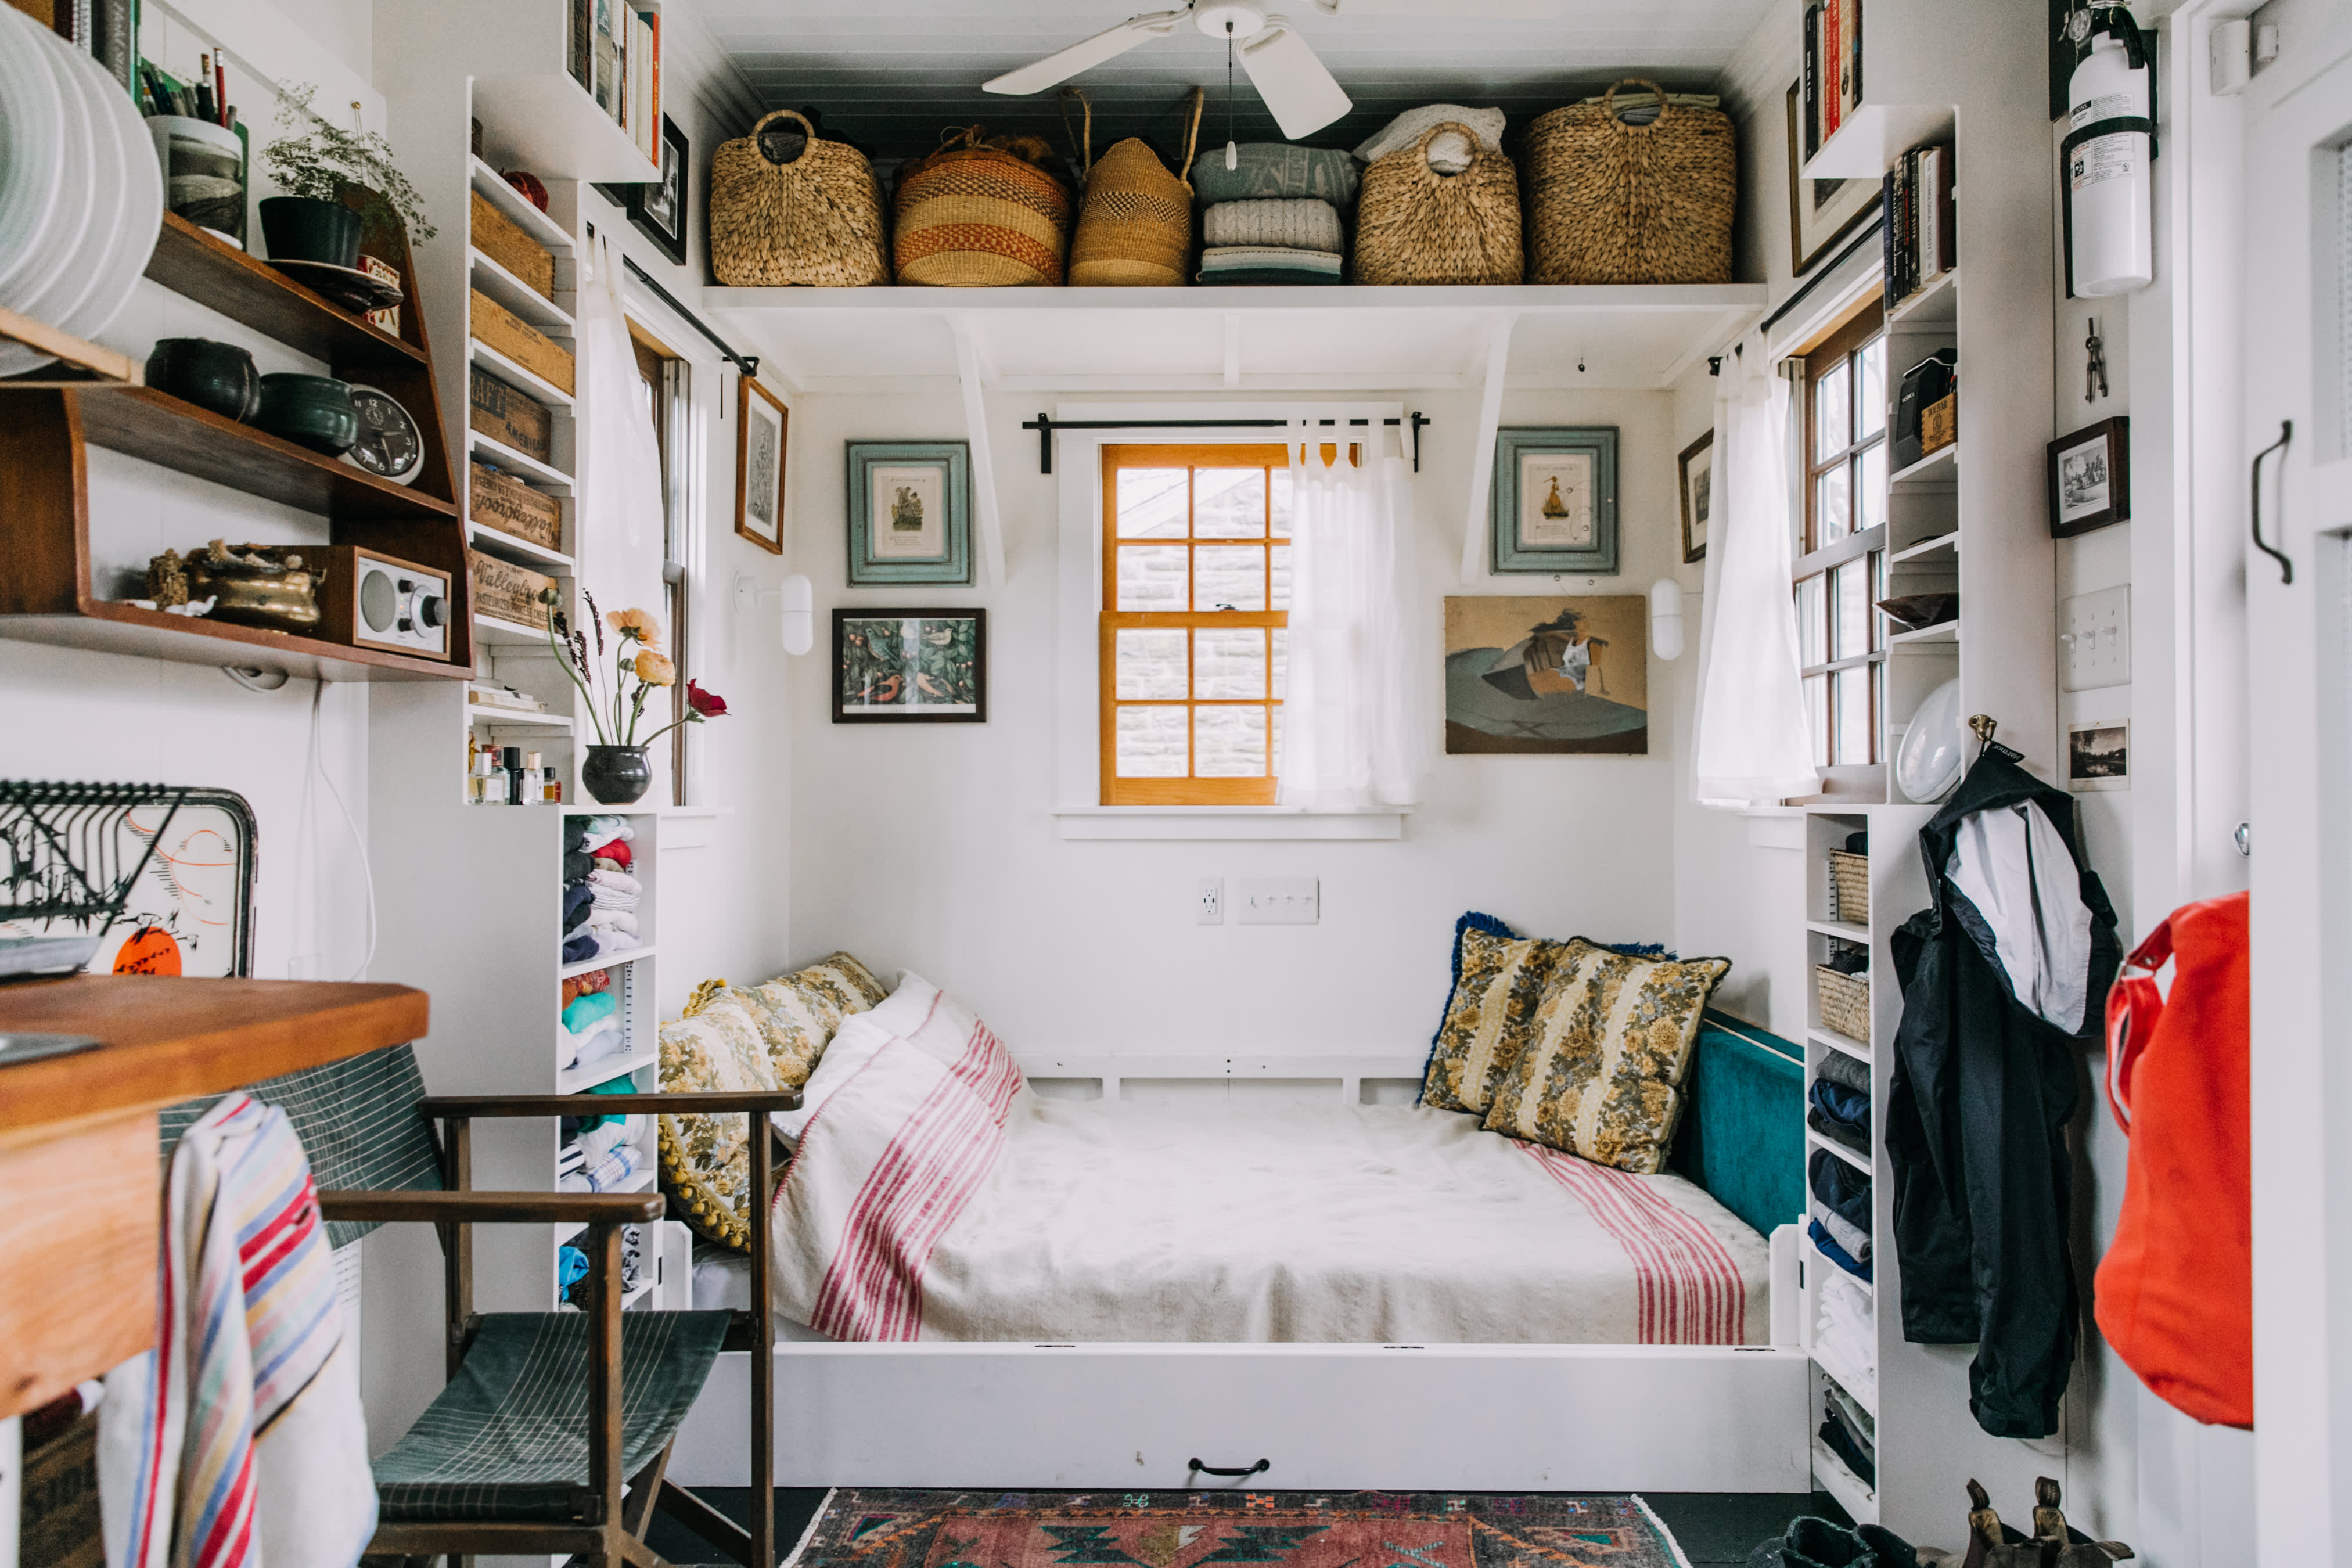 6 Major Decorating Tips From Tiny House Owners | Apartment Therapy